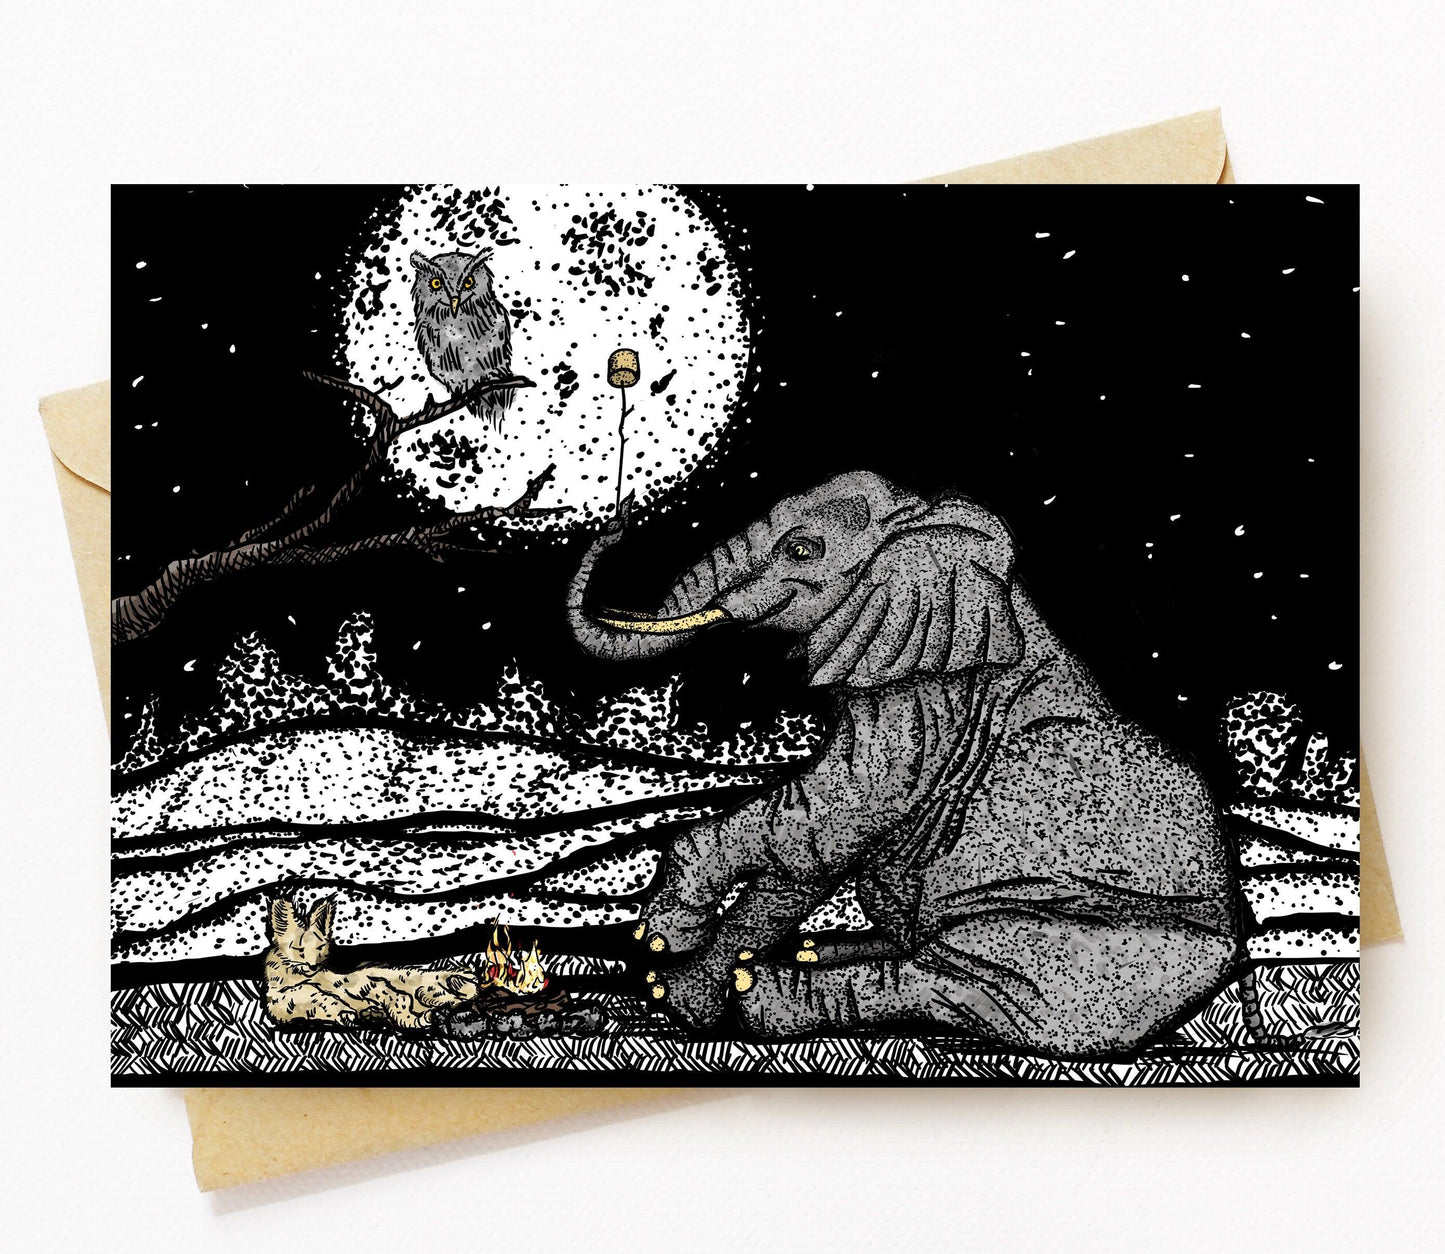 BellavanceInk: Greeting Card With Elephant, Owl, And Cat Sitting By A Camp Fire Pen & Ink Watercolor Illustration 5 x 7 Inches - BellavanceInk